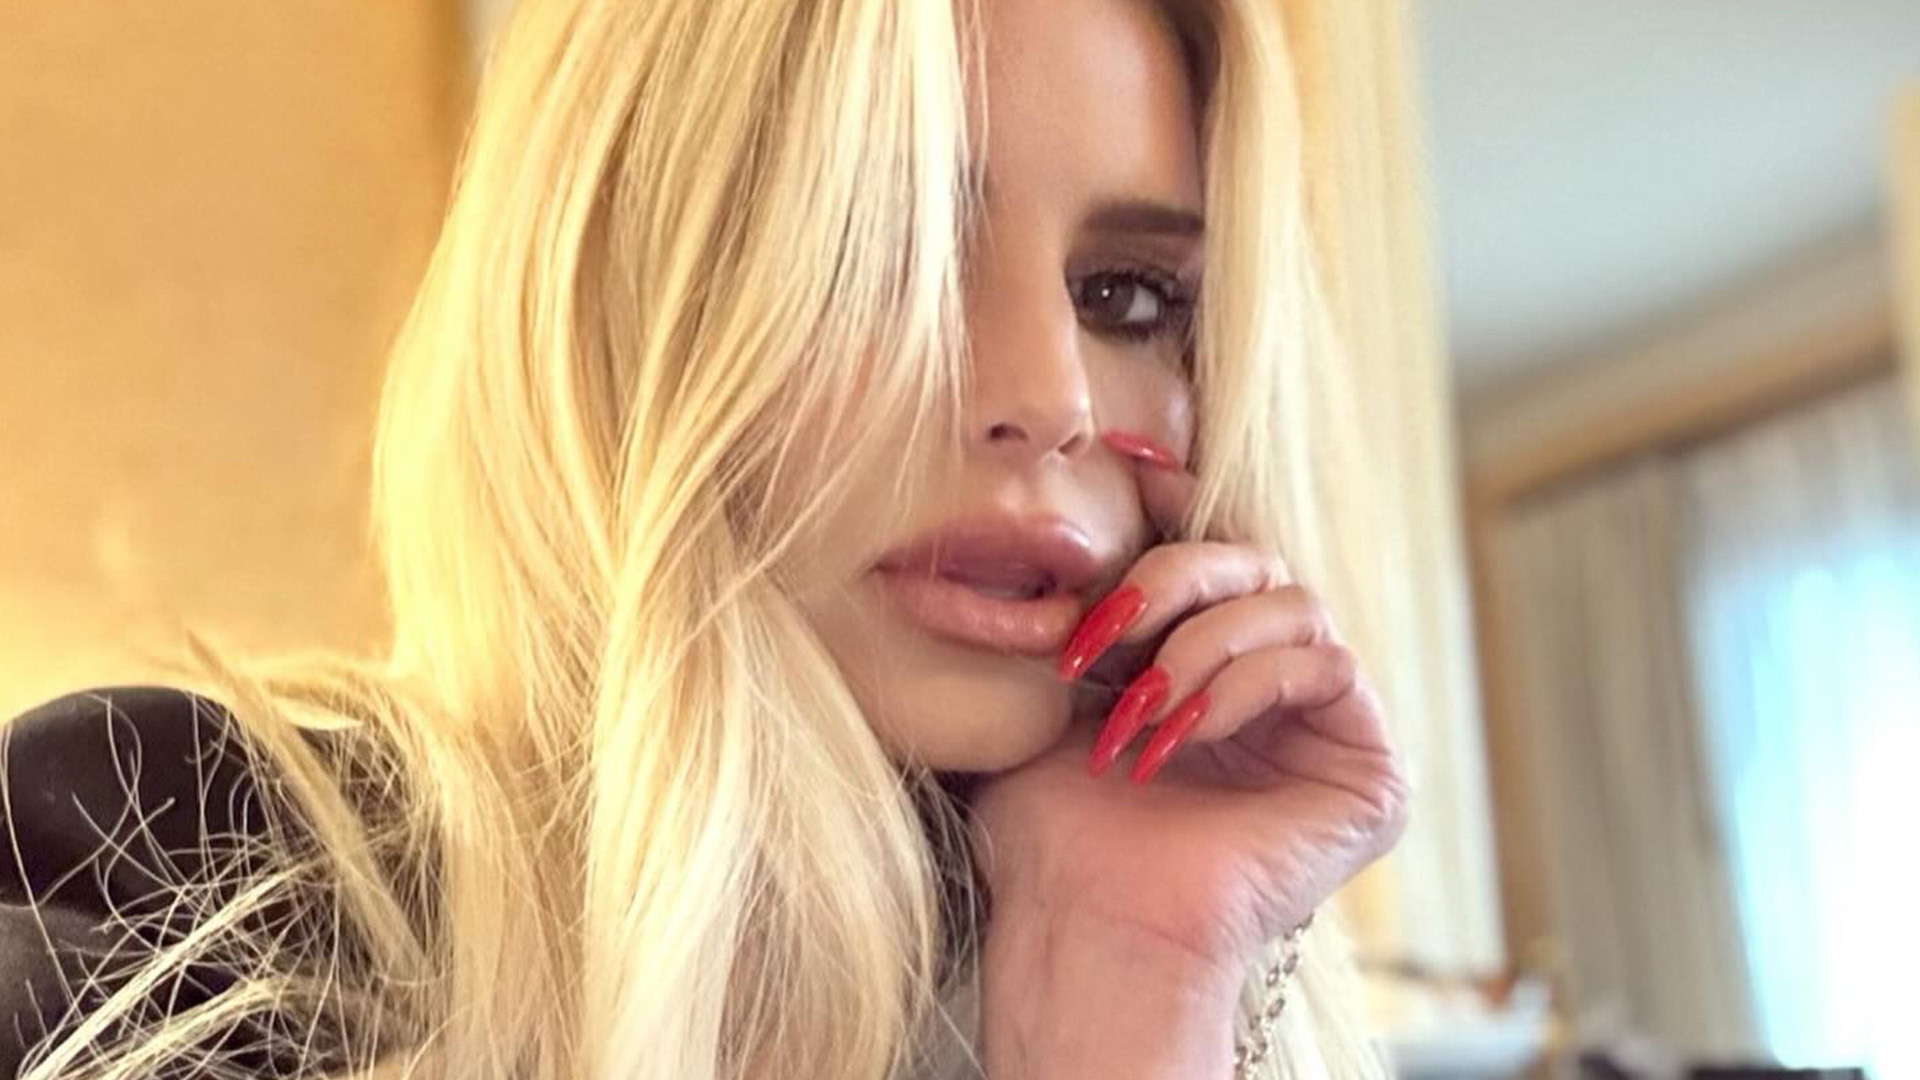 Jessica Simpson’s Dramatic Lip Transformation Raises Eyebrows – Fans Concerned